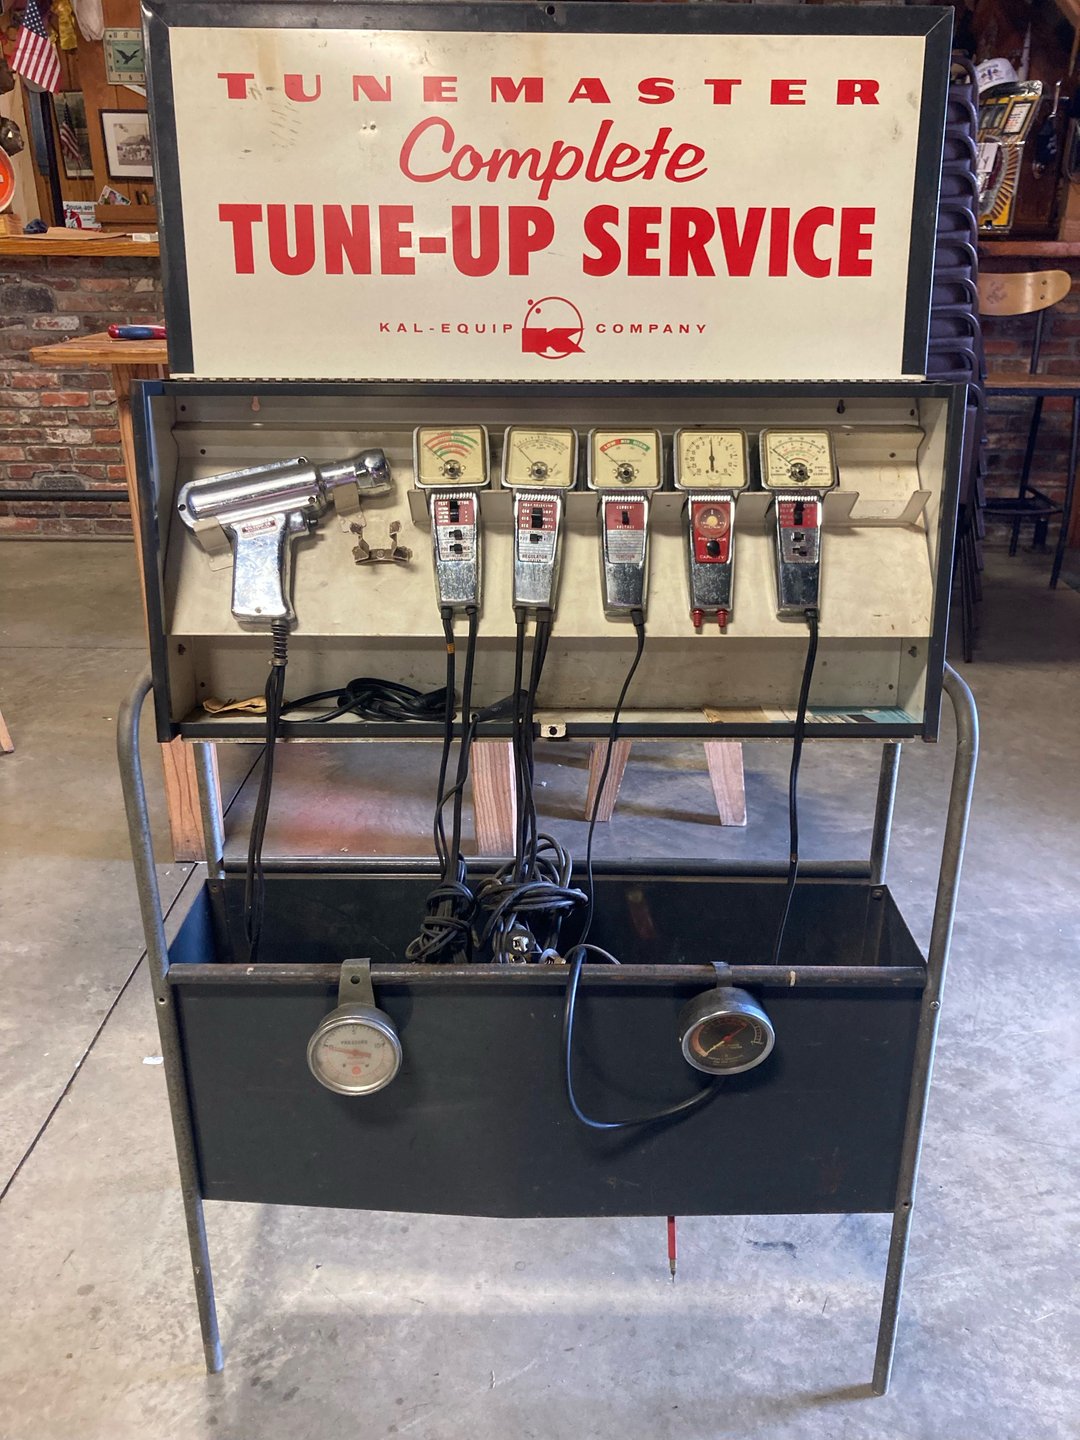 Kal equipment co tunemaster complete tune up service